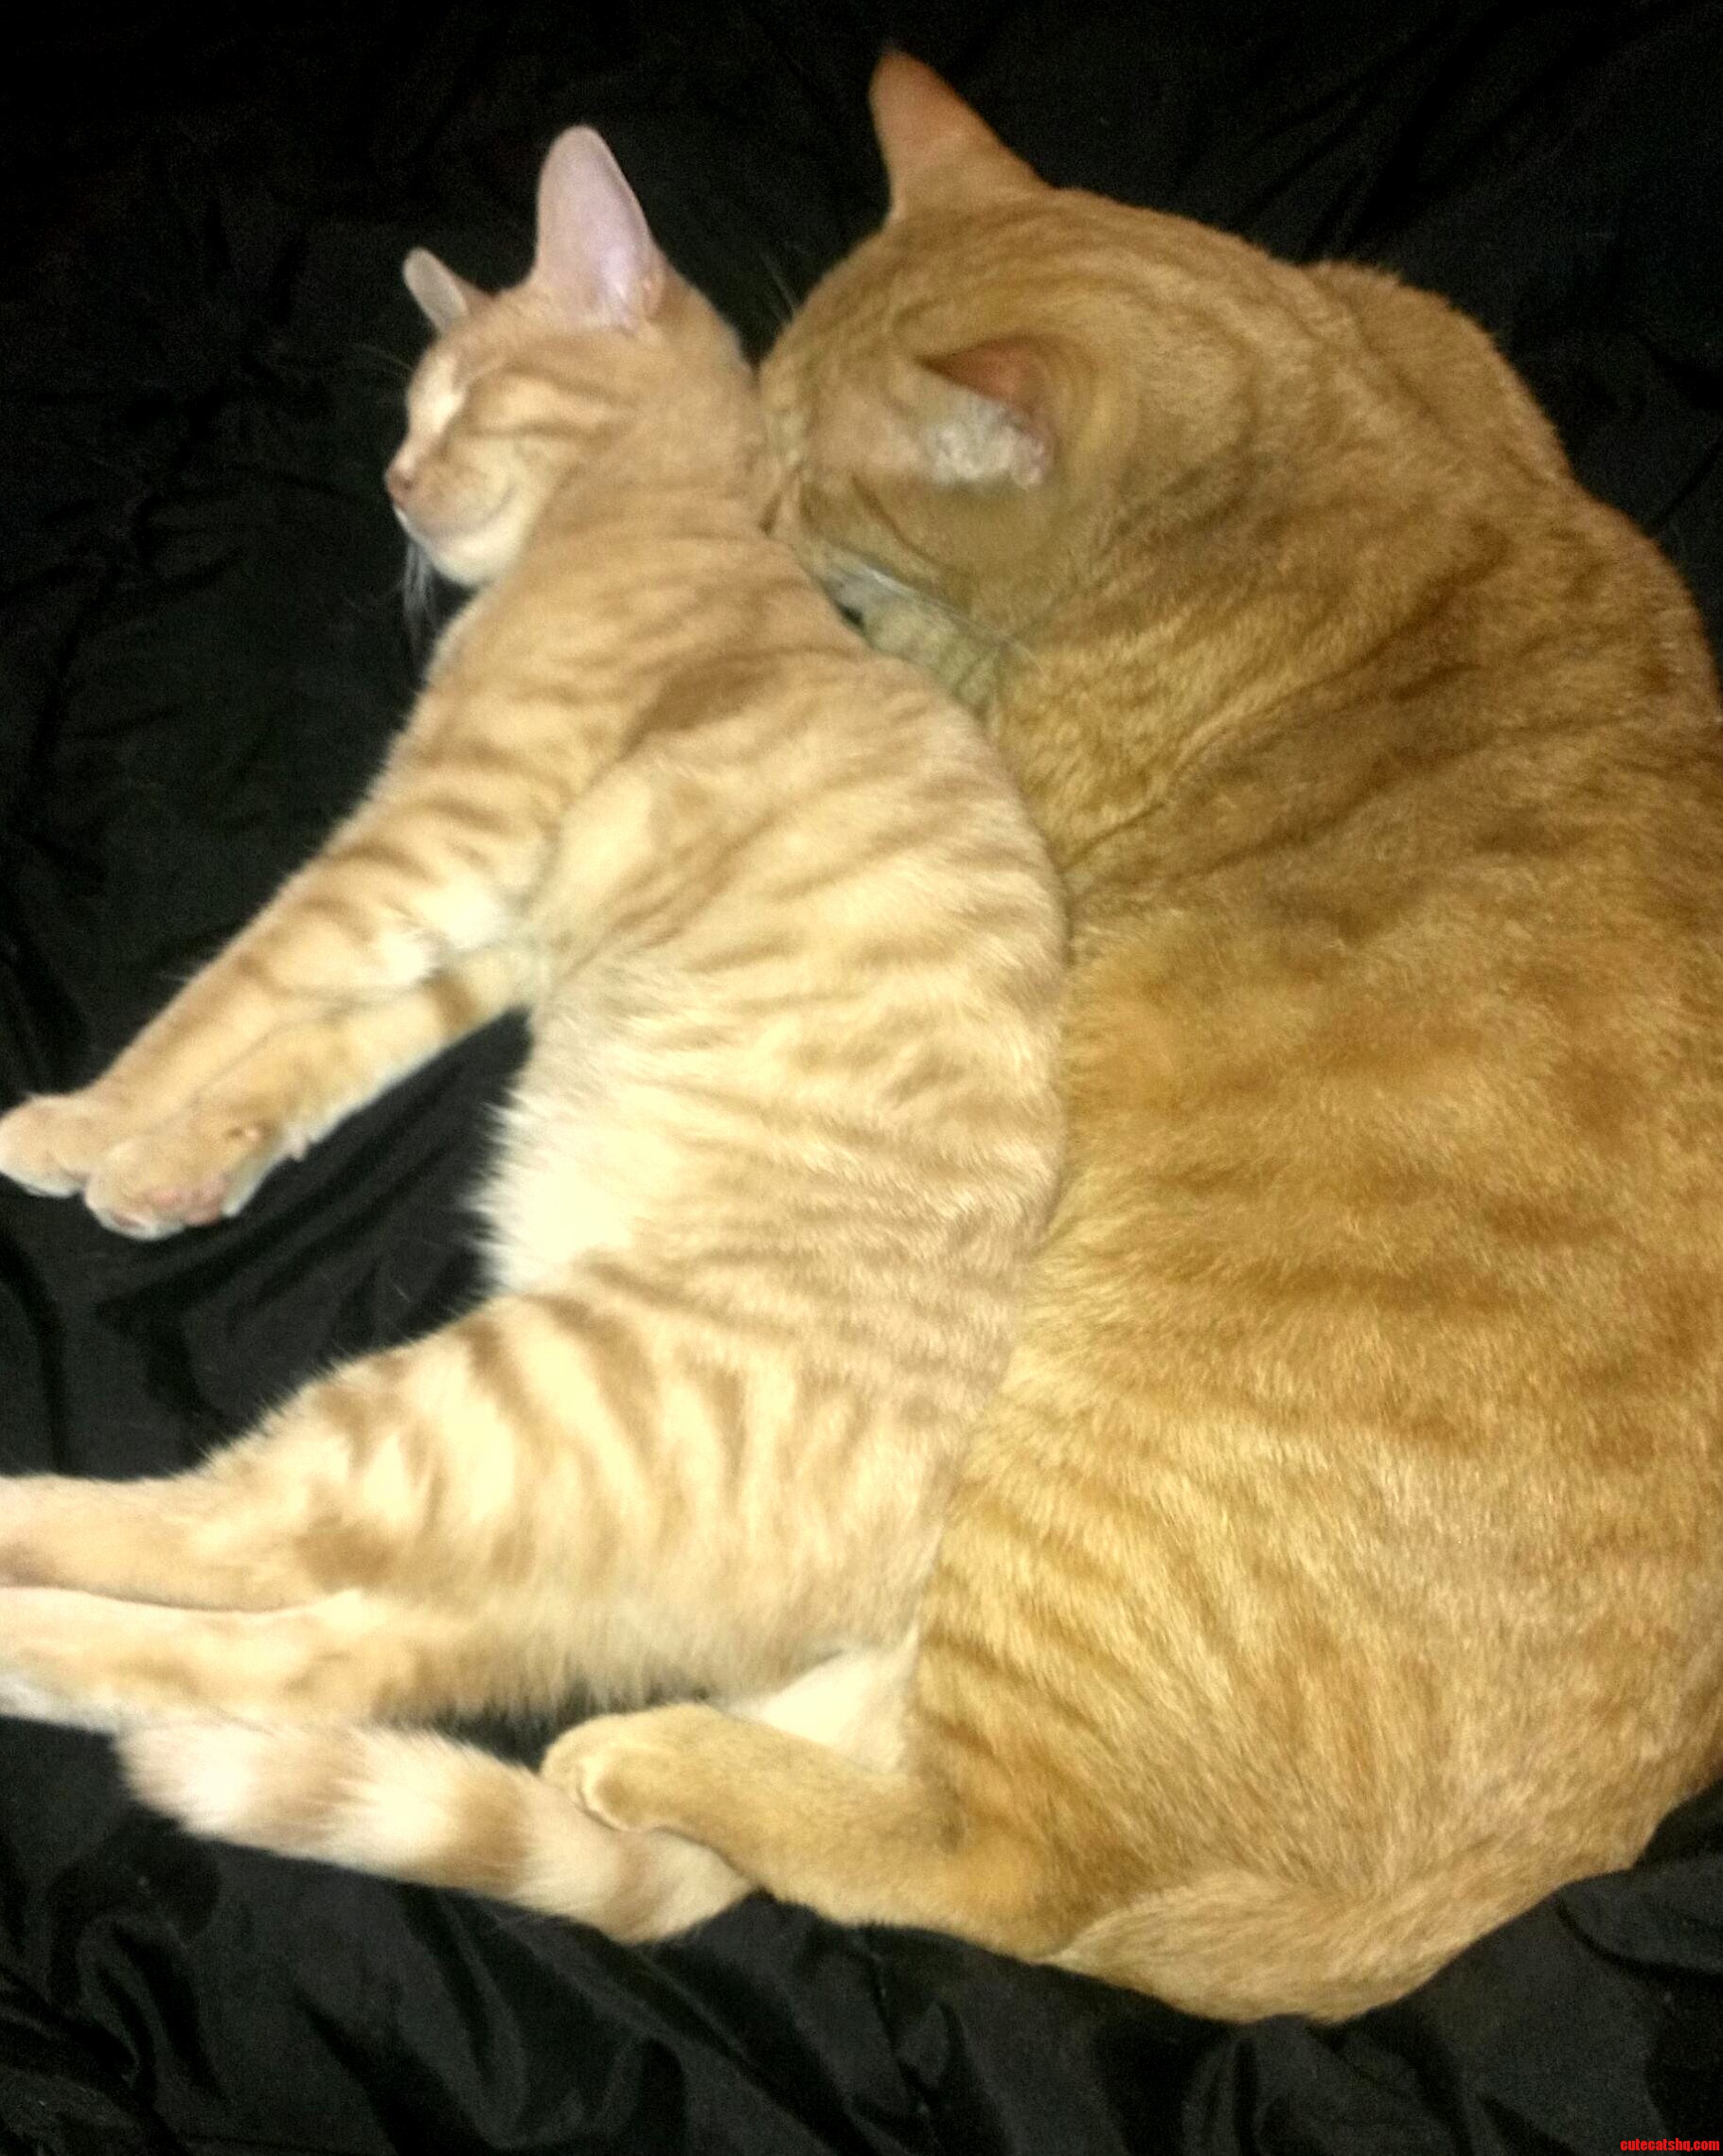 My Boys Keeping One Another Warm On A Cold Night.